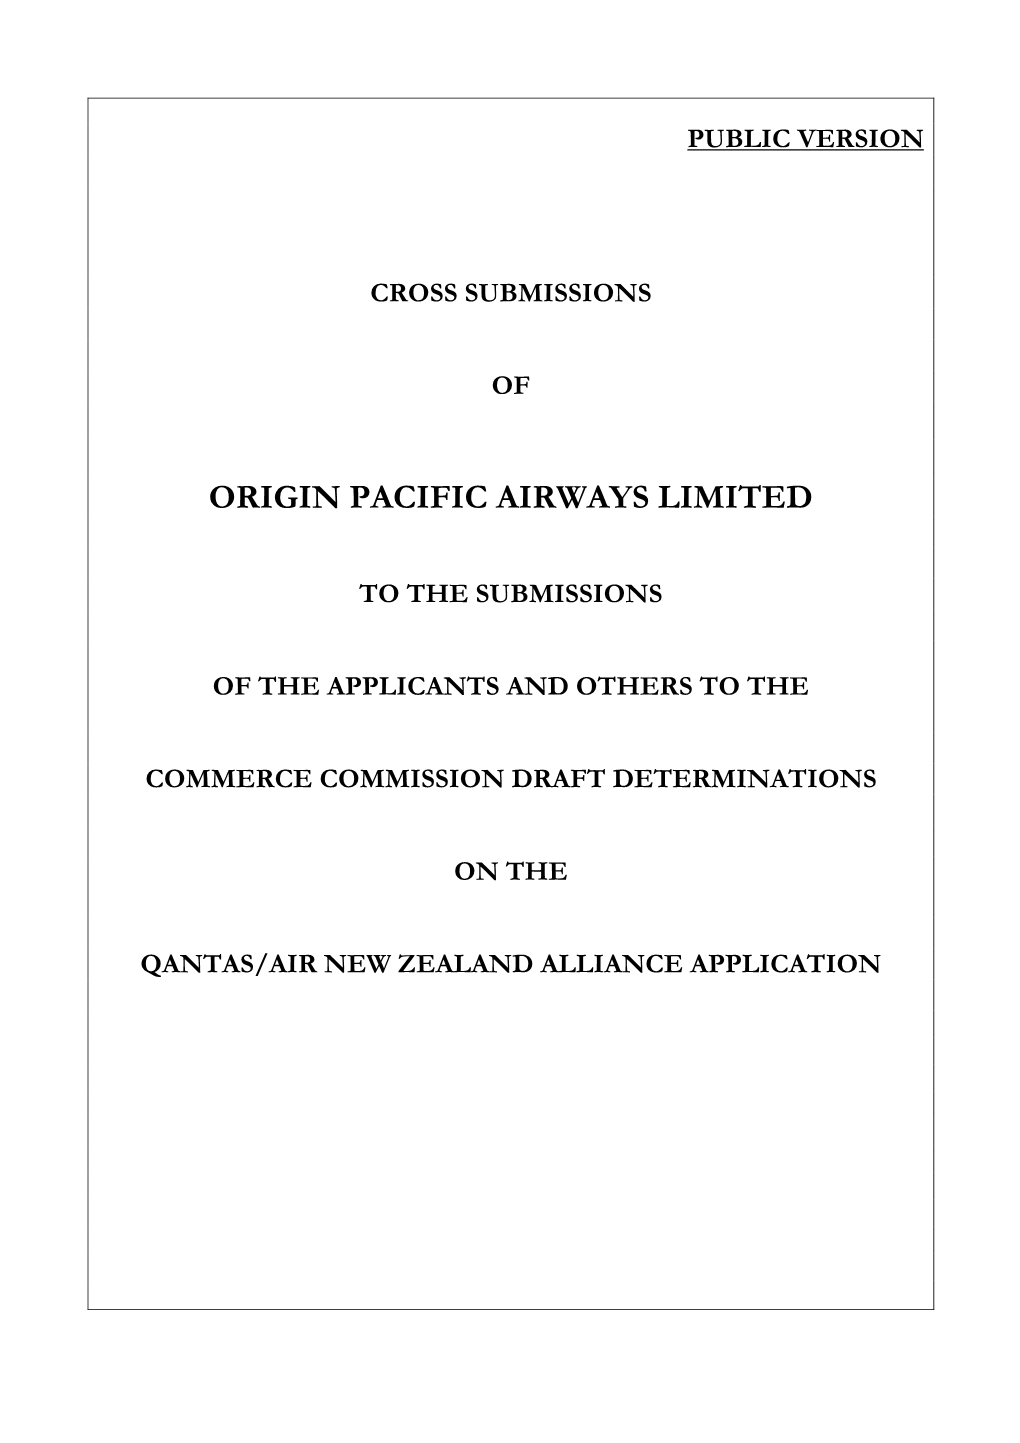 Cross Submissions of Origin Pacific Airways Limited